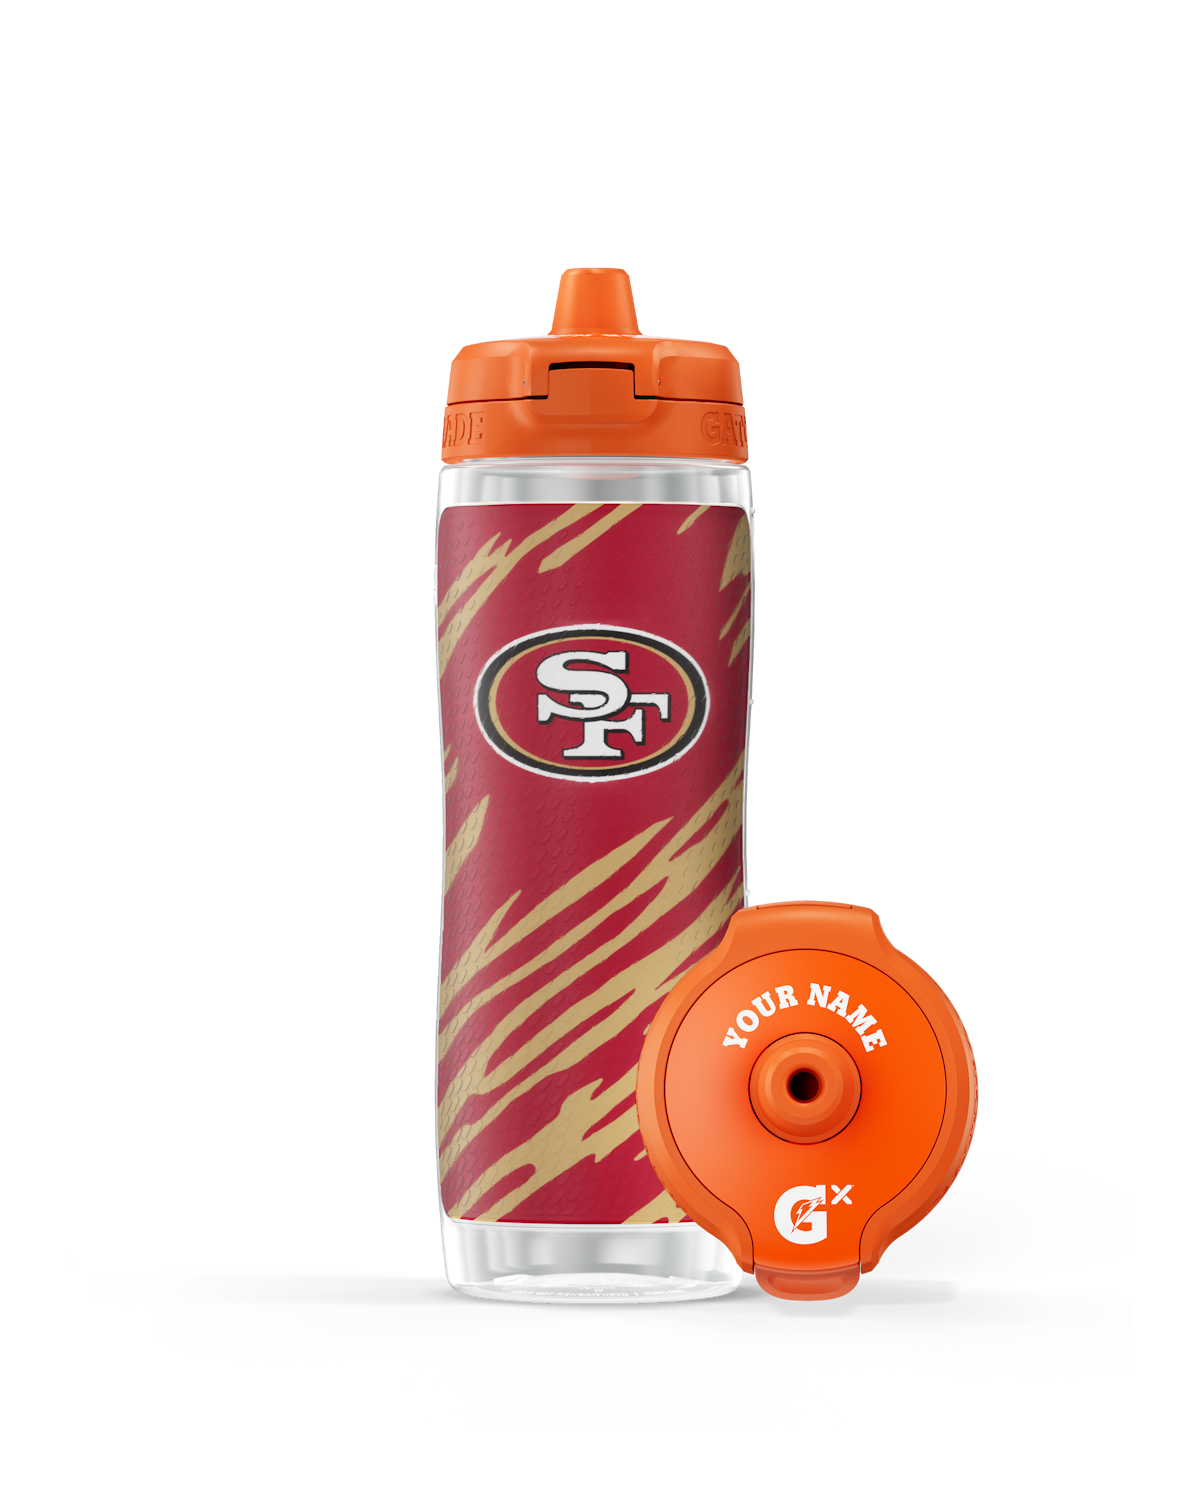 https://www.datocms-assets.com/101859/1696886530-00052000055665_nfl_new2023_bottles_san-francisco49ers_producttile_2680x3344.png?auto=format&fit=fill&w=1200&ar=4%3A3&fill=solid